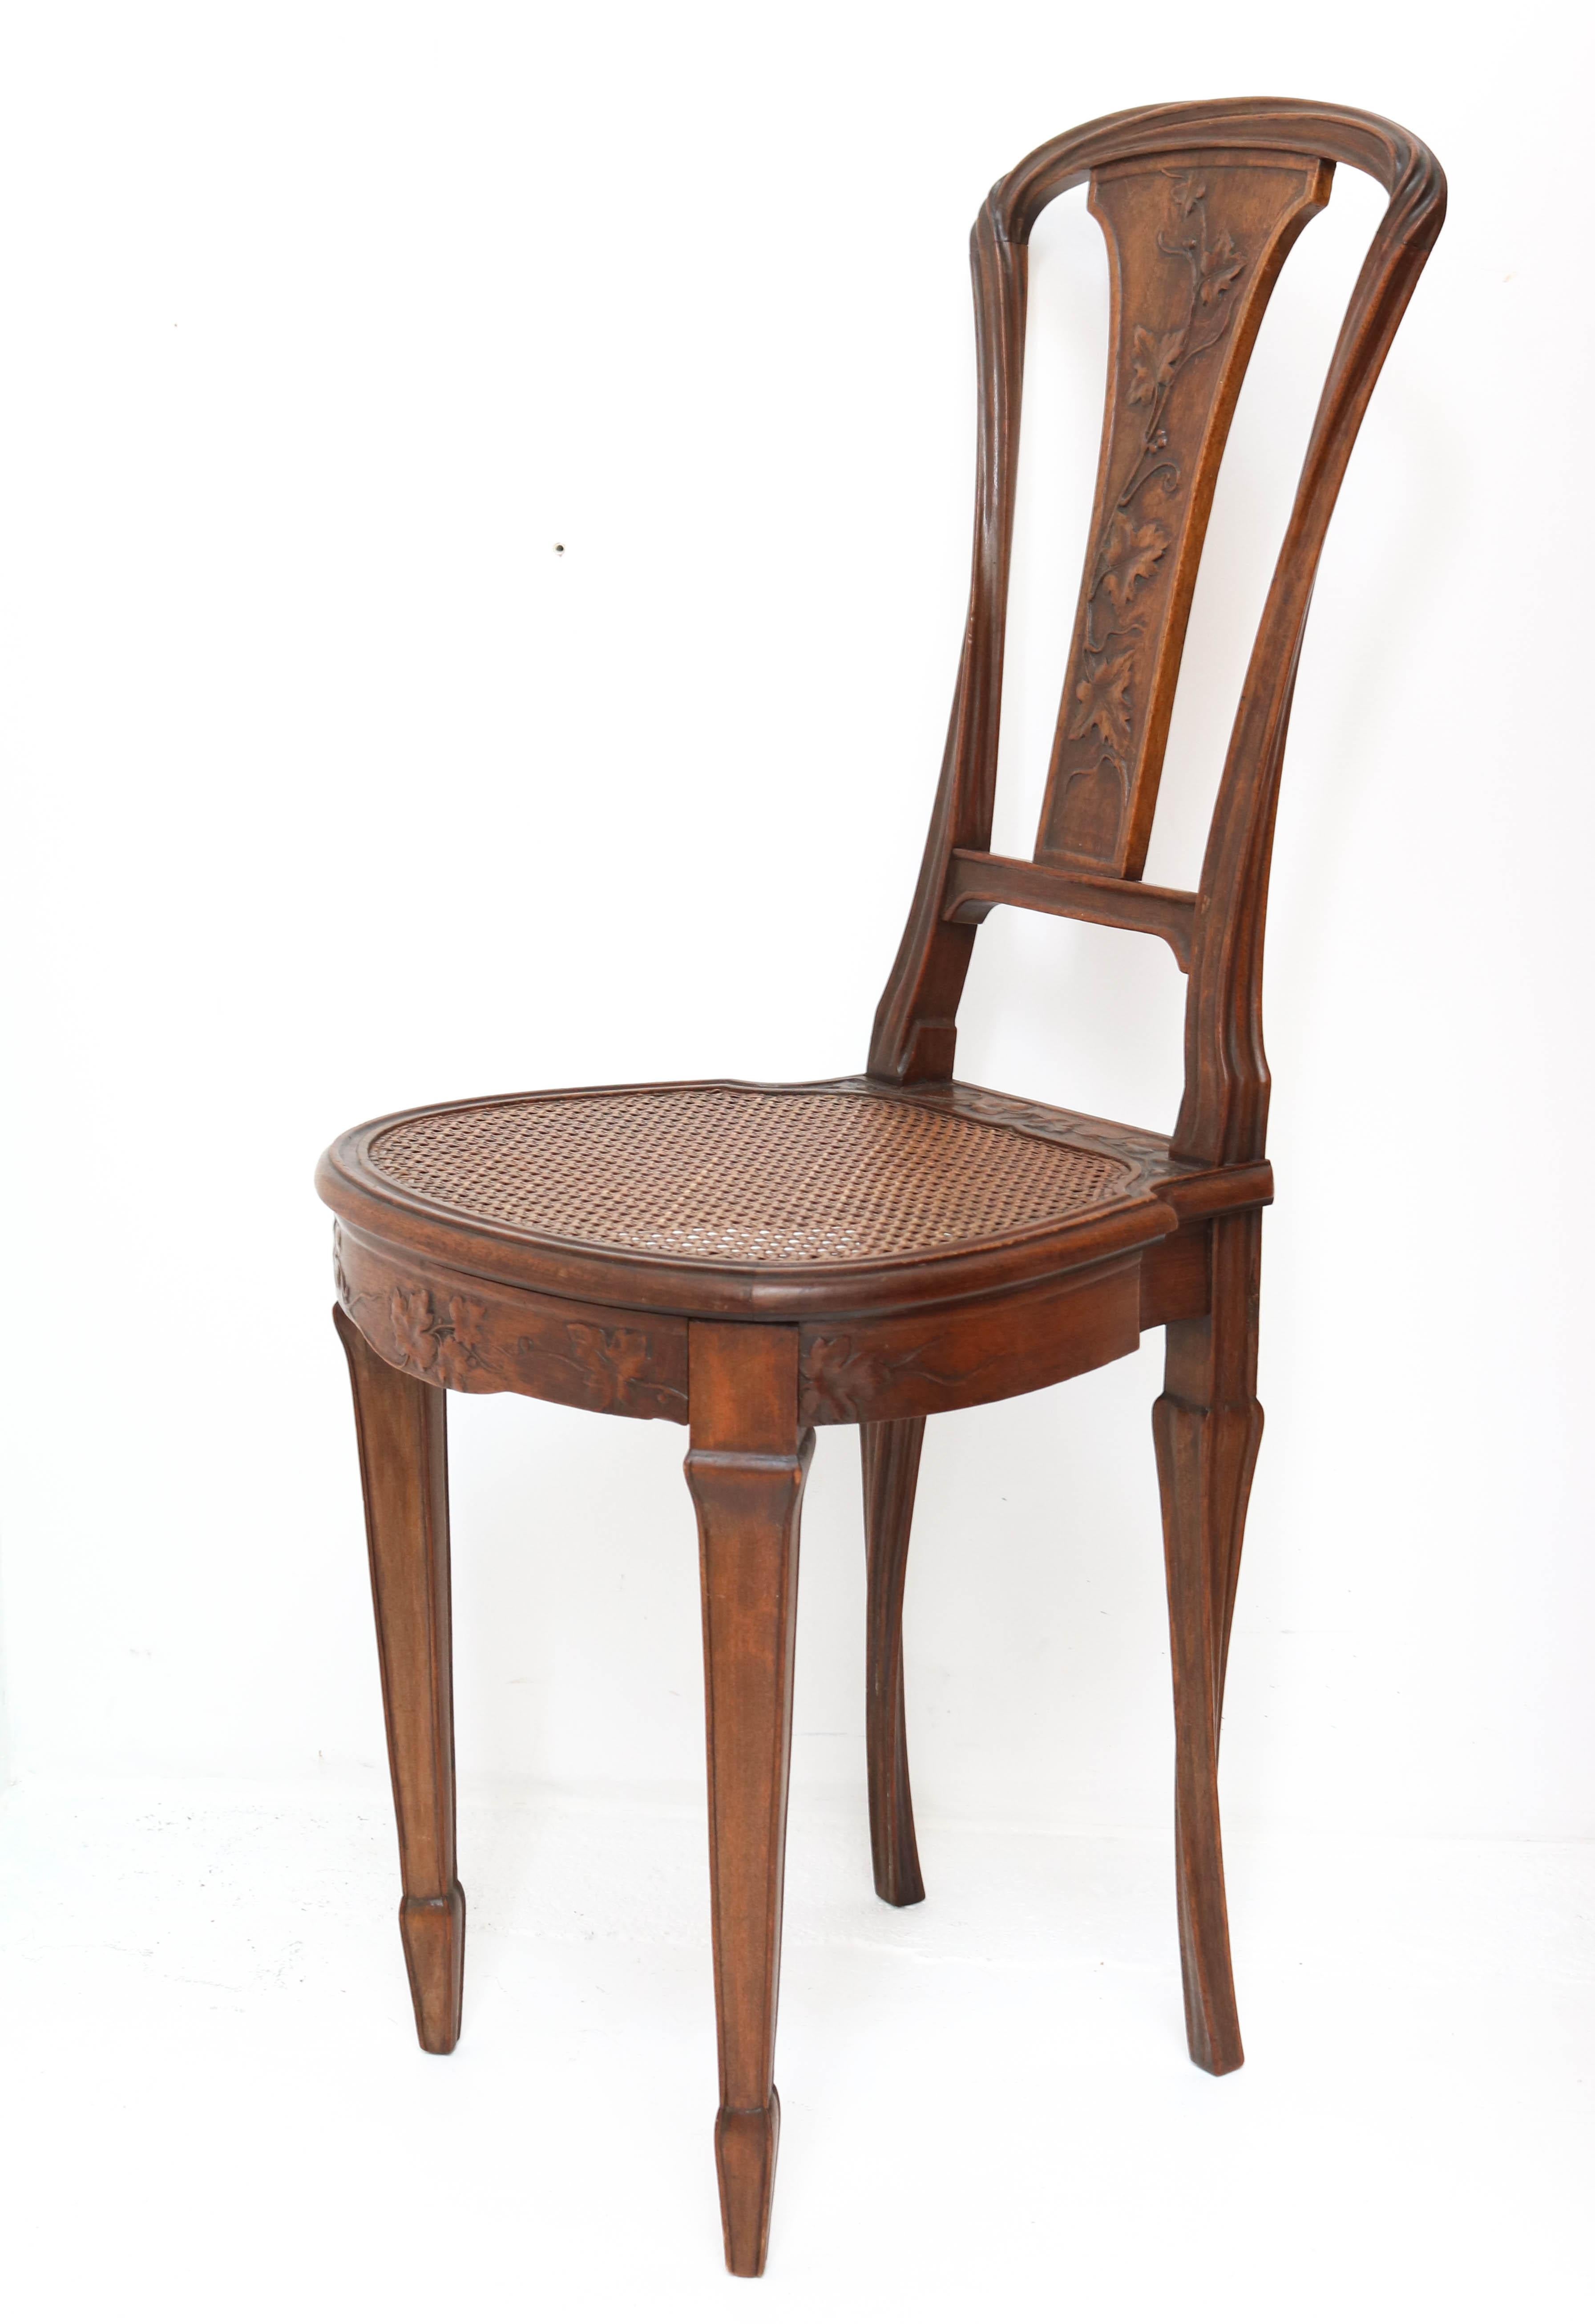 Rattan French Walnut Art Nouveau Side Chair Attributed to Louis Majorelle, 1900s